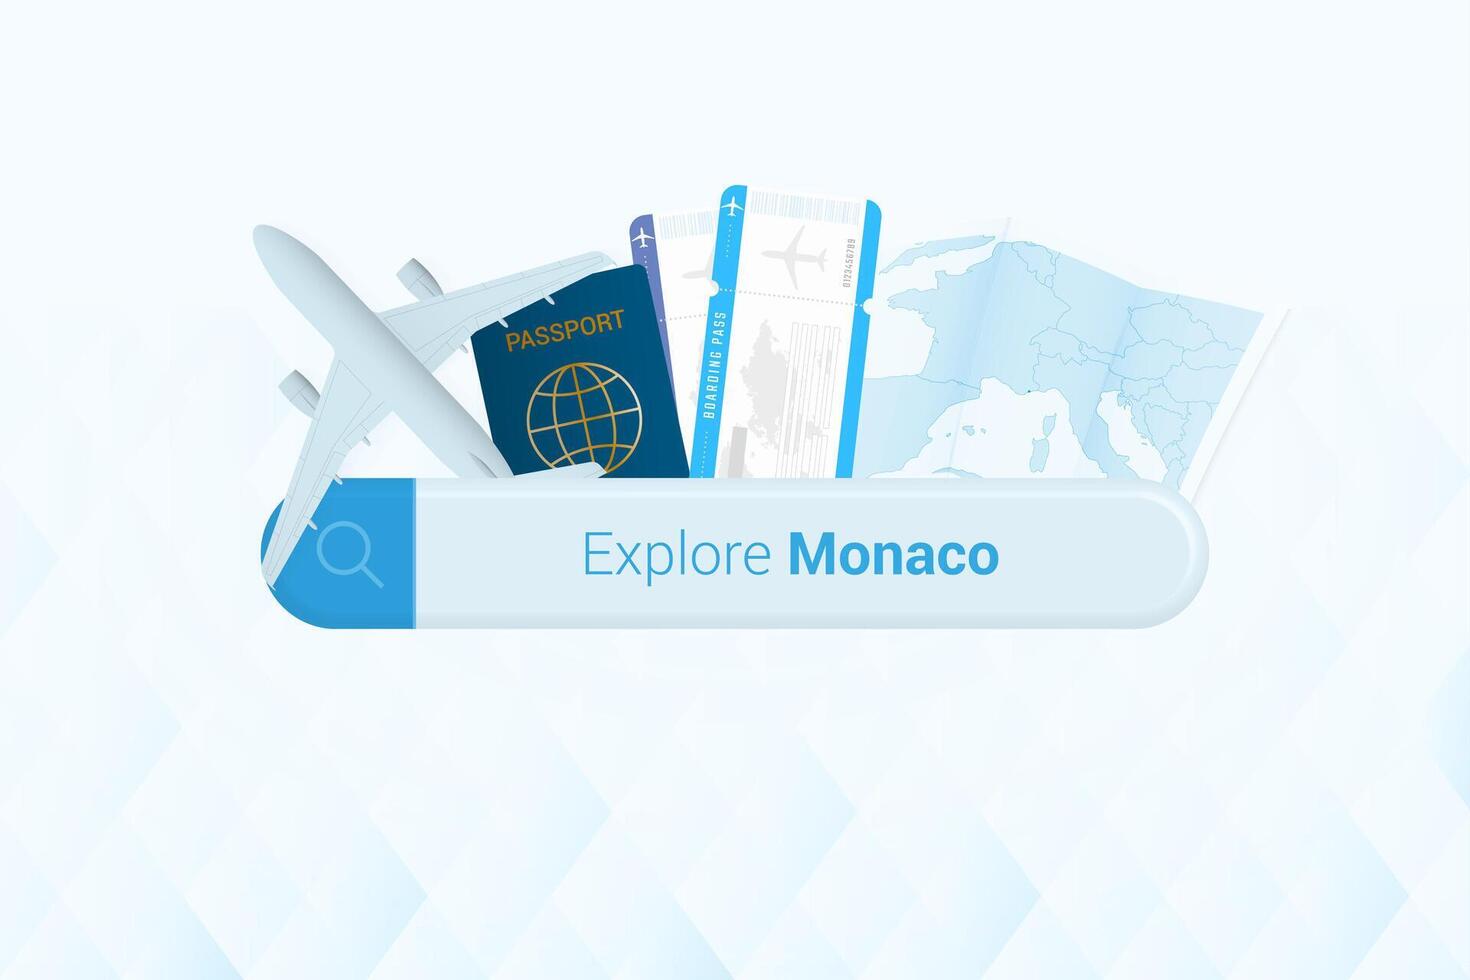 Searching tickets to Monaco or travel destination in Monaco. Searching bar with airplane, passport, boarding pass, tickets and map. vector